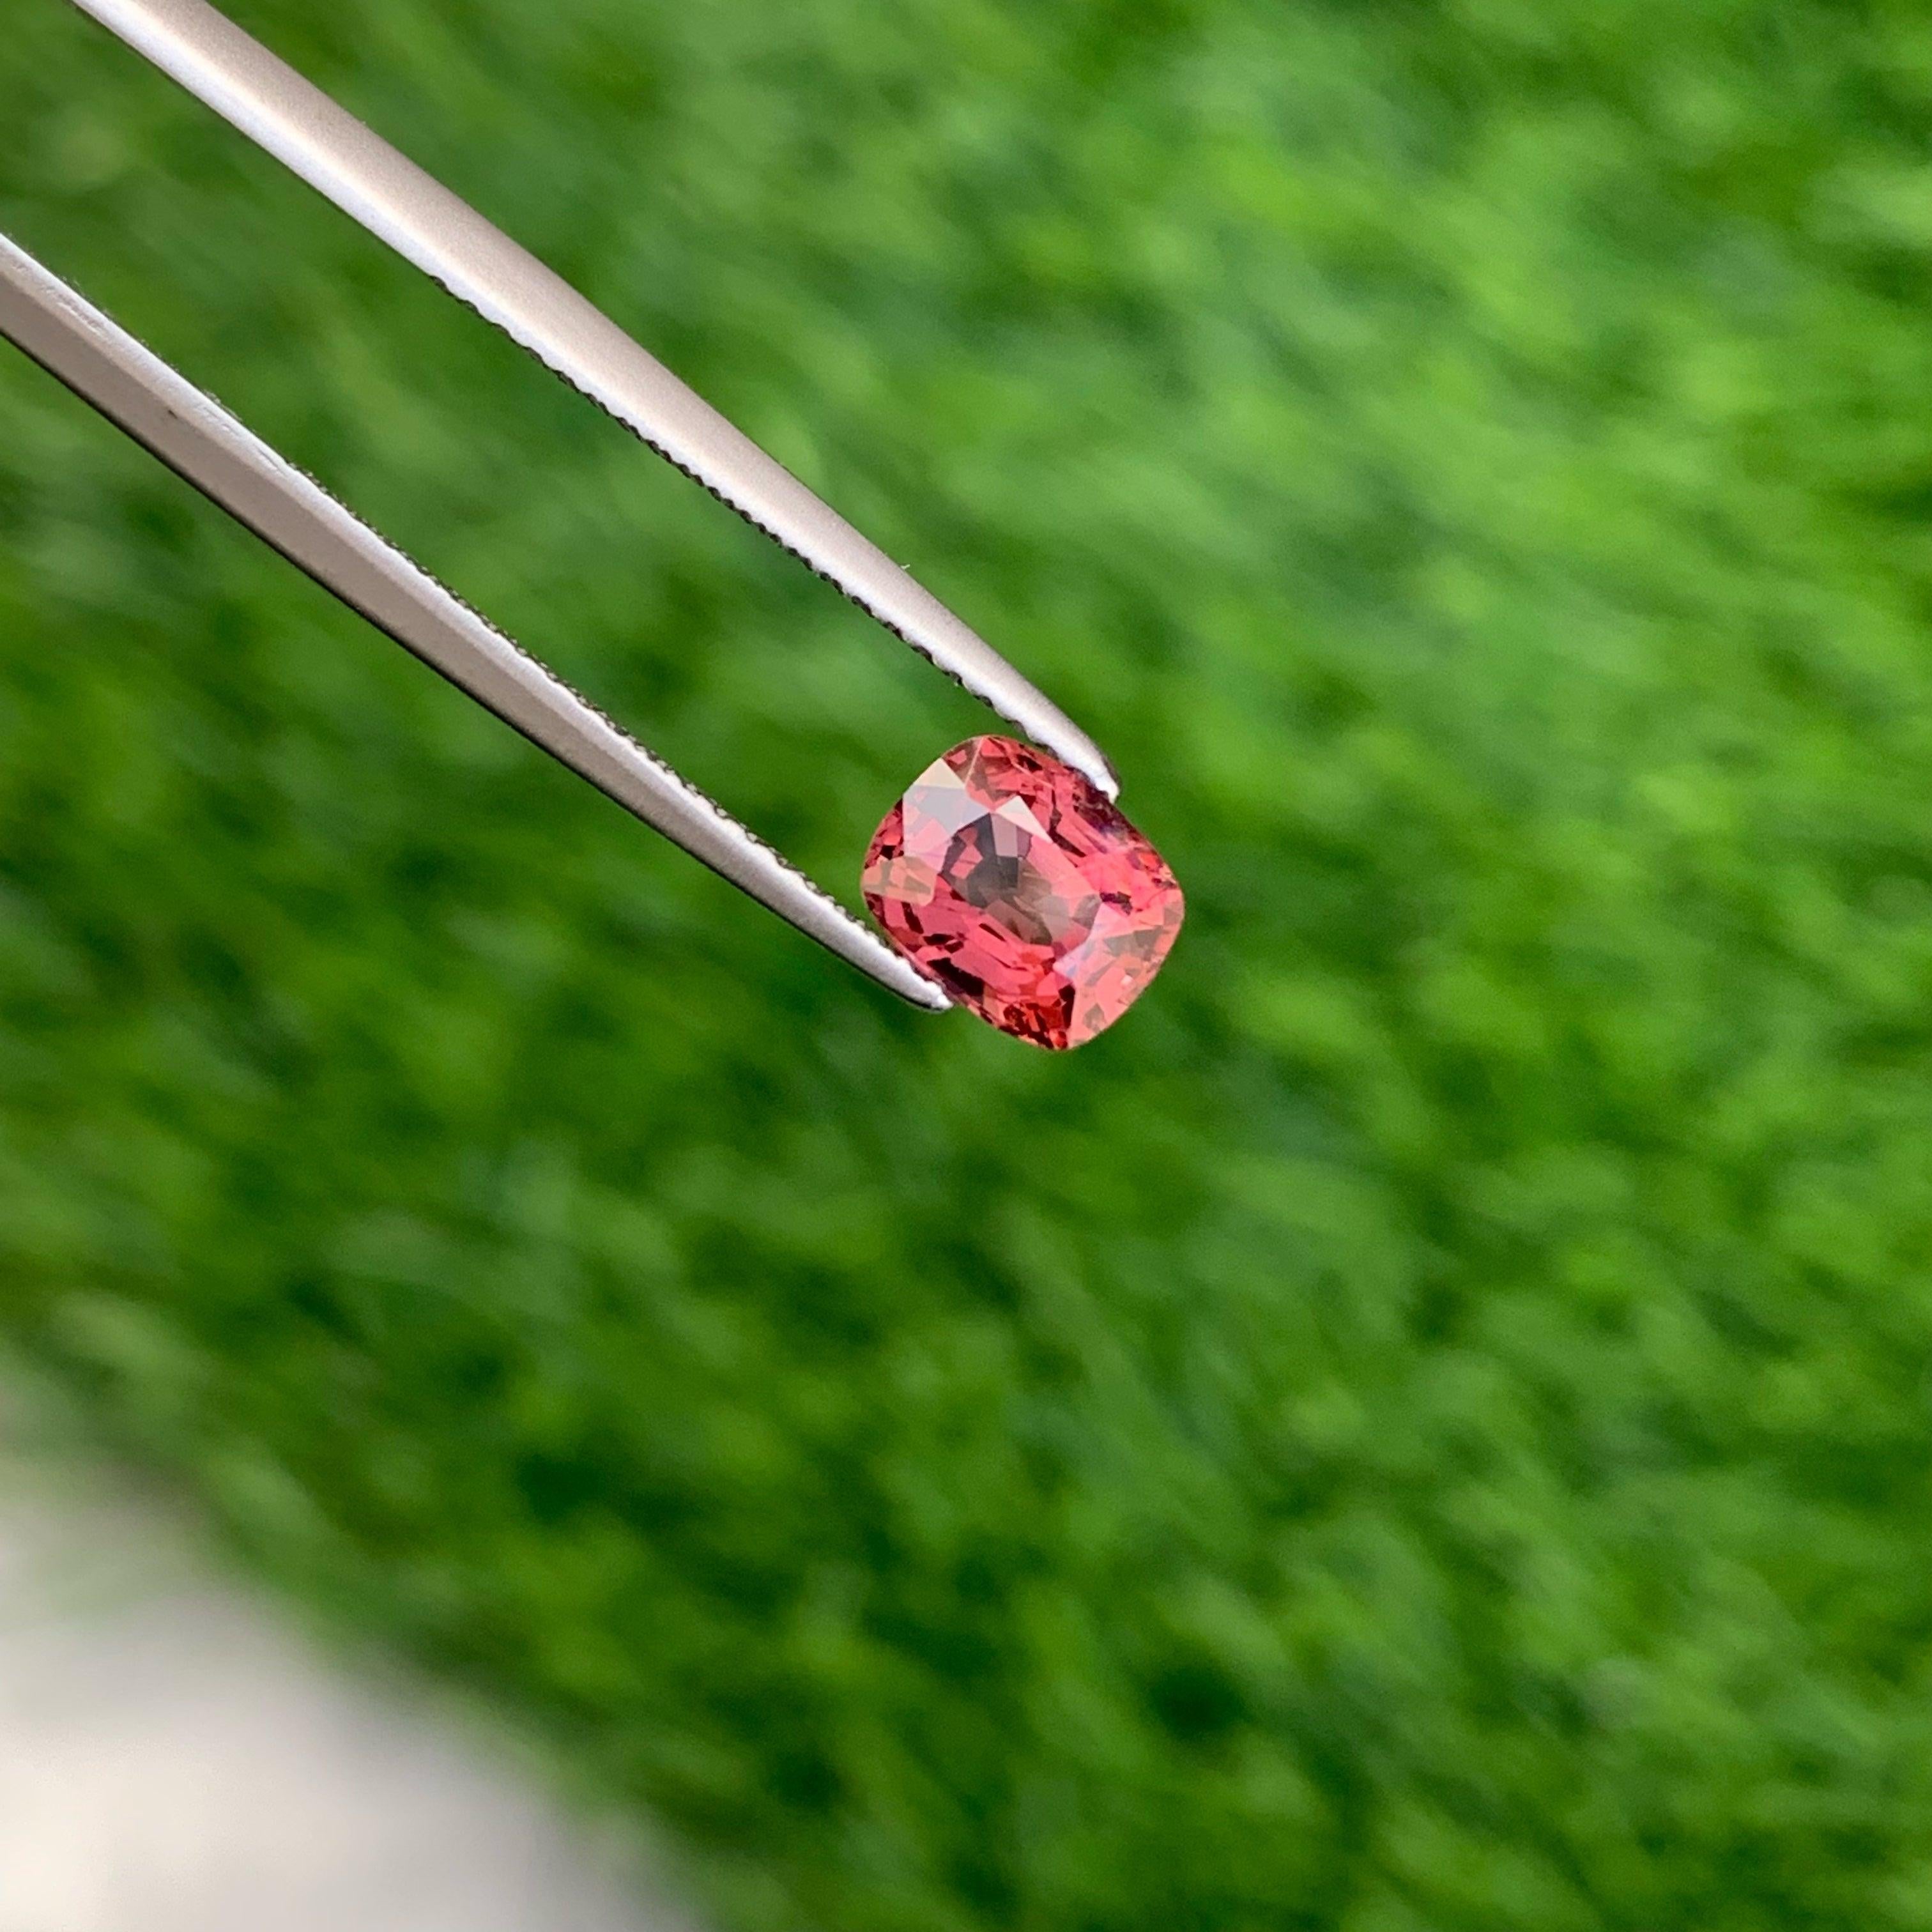 Lovely Natural Spinel Loose Gemstone, Available For Sale At Wholesale Price Natural High Quality 1.15 carats VSI Clarity Natural Loose Spinel from Burma.

Product Information:
GEMSTONE TYPE:	Lovely Natural Spinel Loose Gemstone
WEIGHT:	1.15